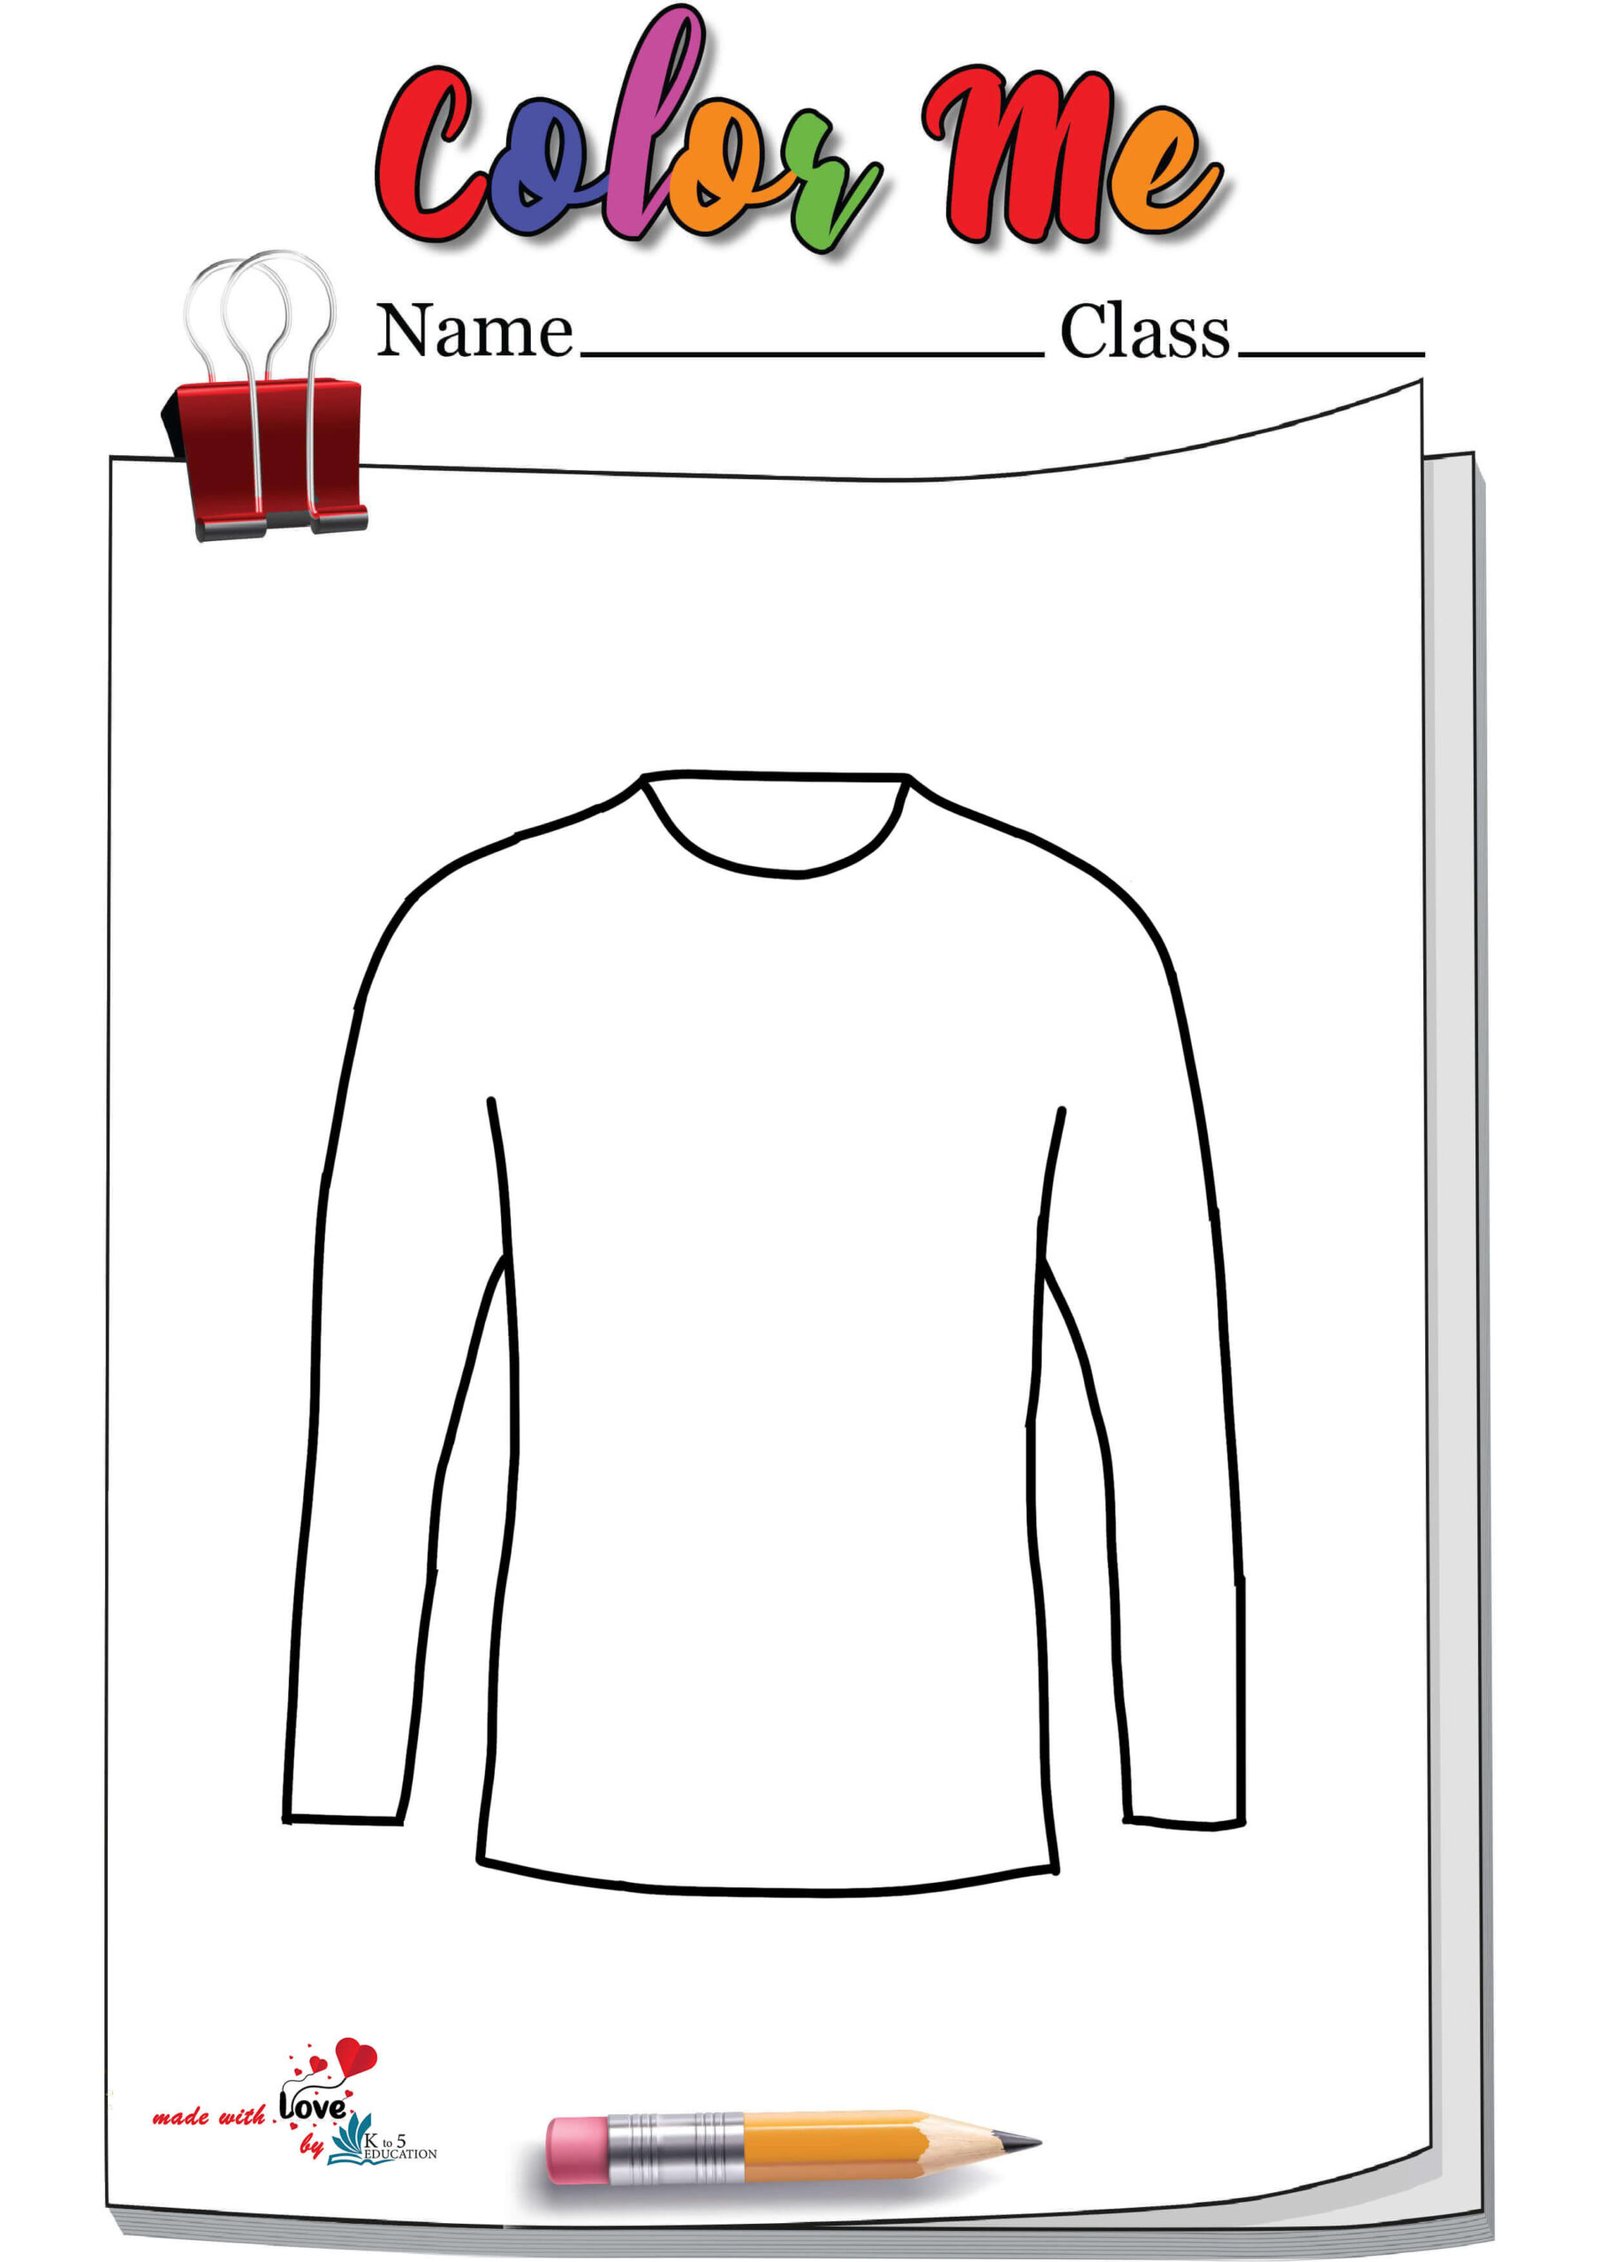 Full Sleeve T-shirt Coloring Page